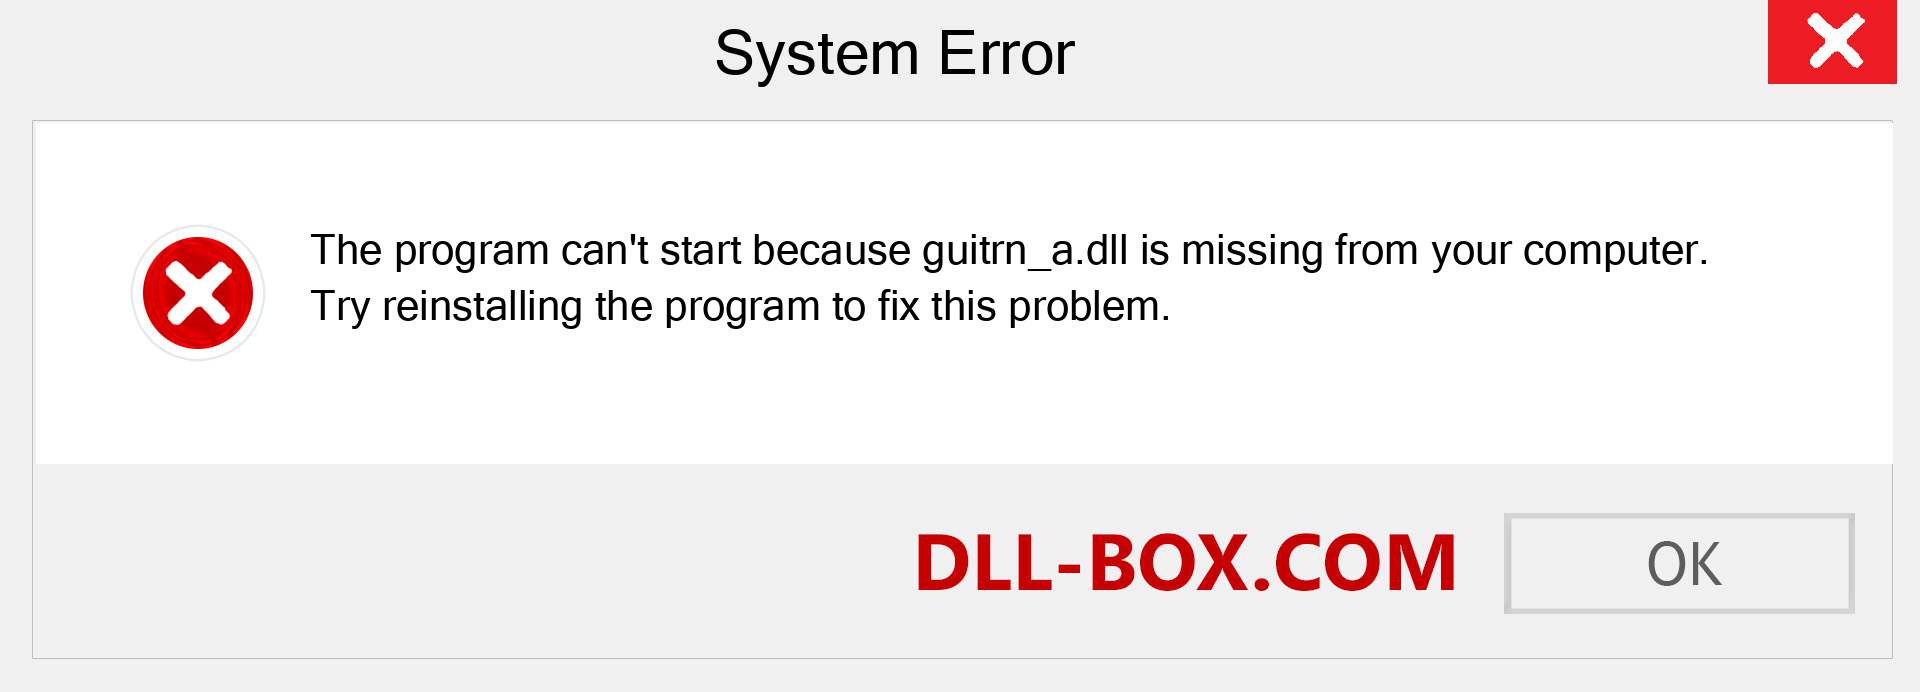  guitrn_a.dll file is missing?. Download for Windows 7, 8, 10 - Fix  guitrn_a dll Missing Error on Windows, photos, images